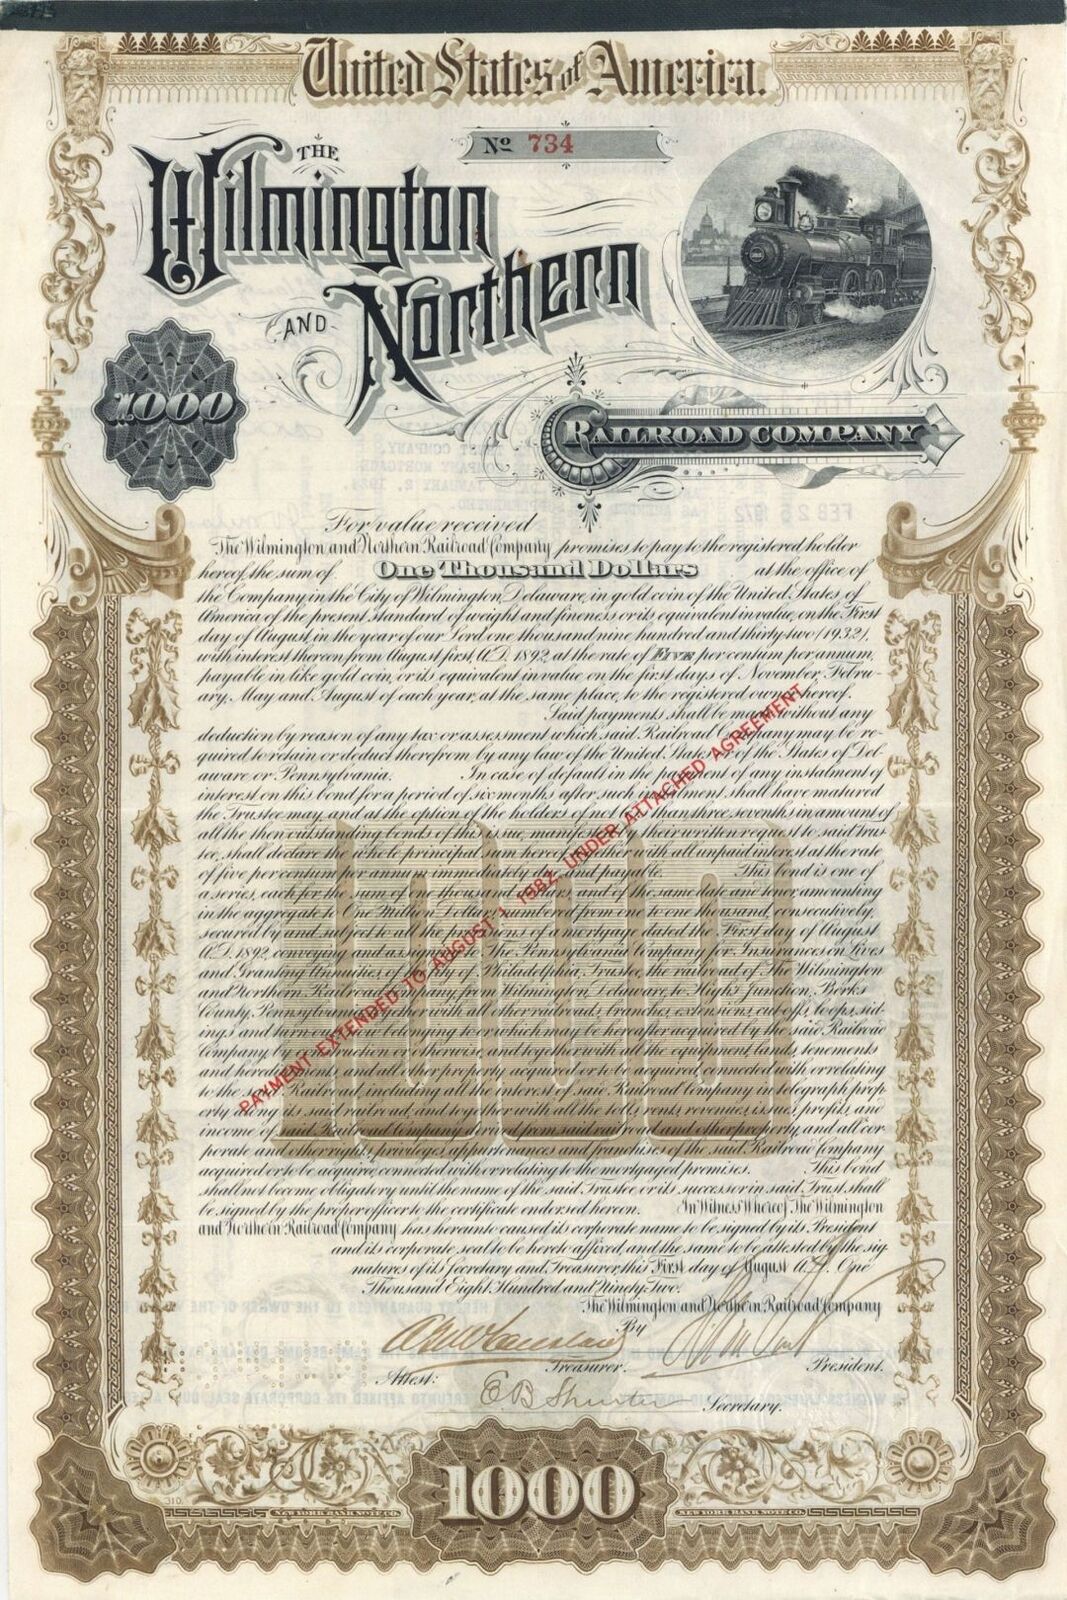 Wilmington and Northern Railroad Co. $1,000 Gold Bond signed by Henry Algernon d